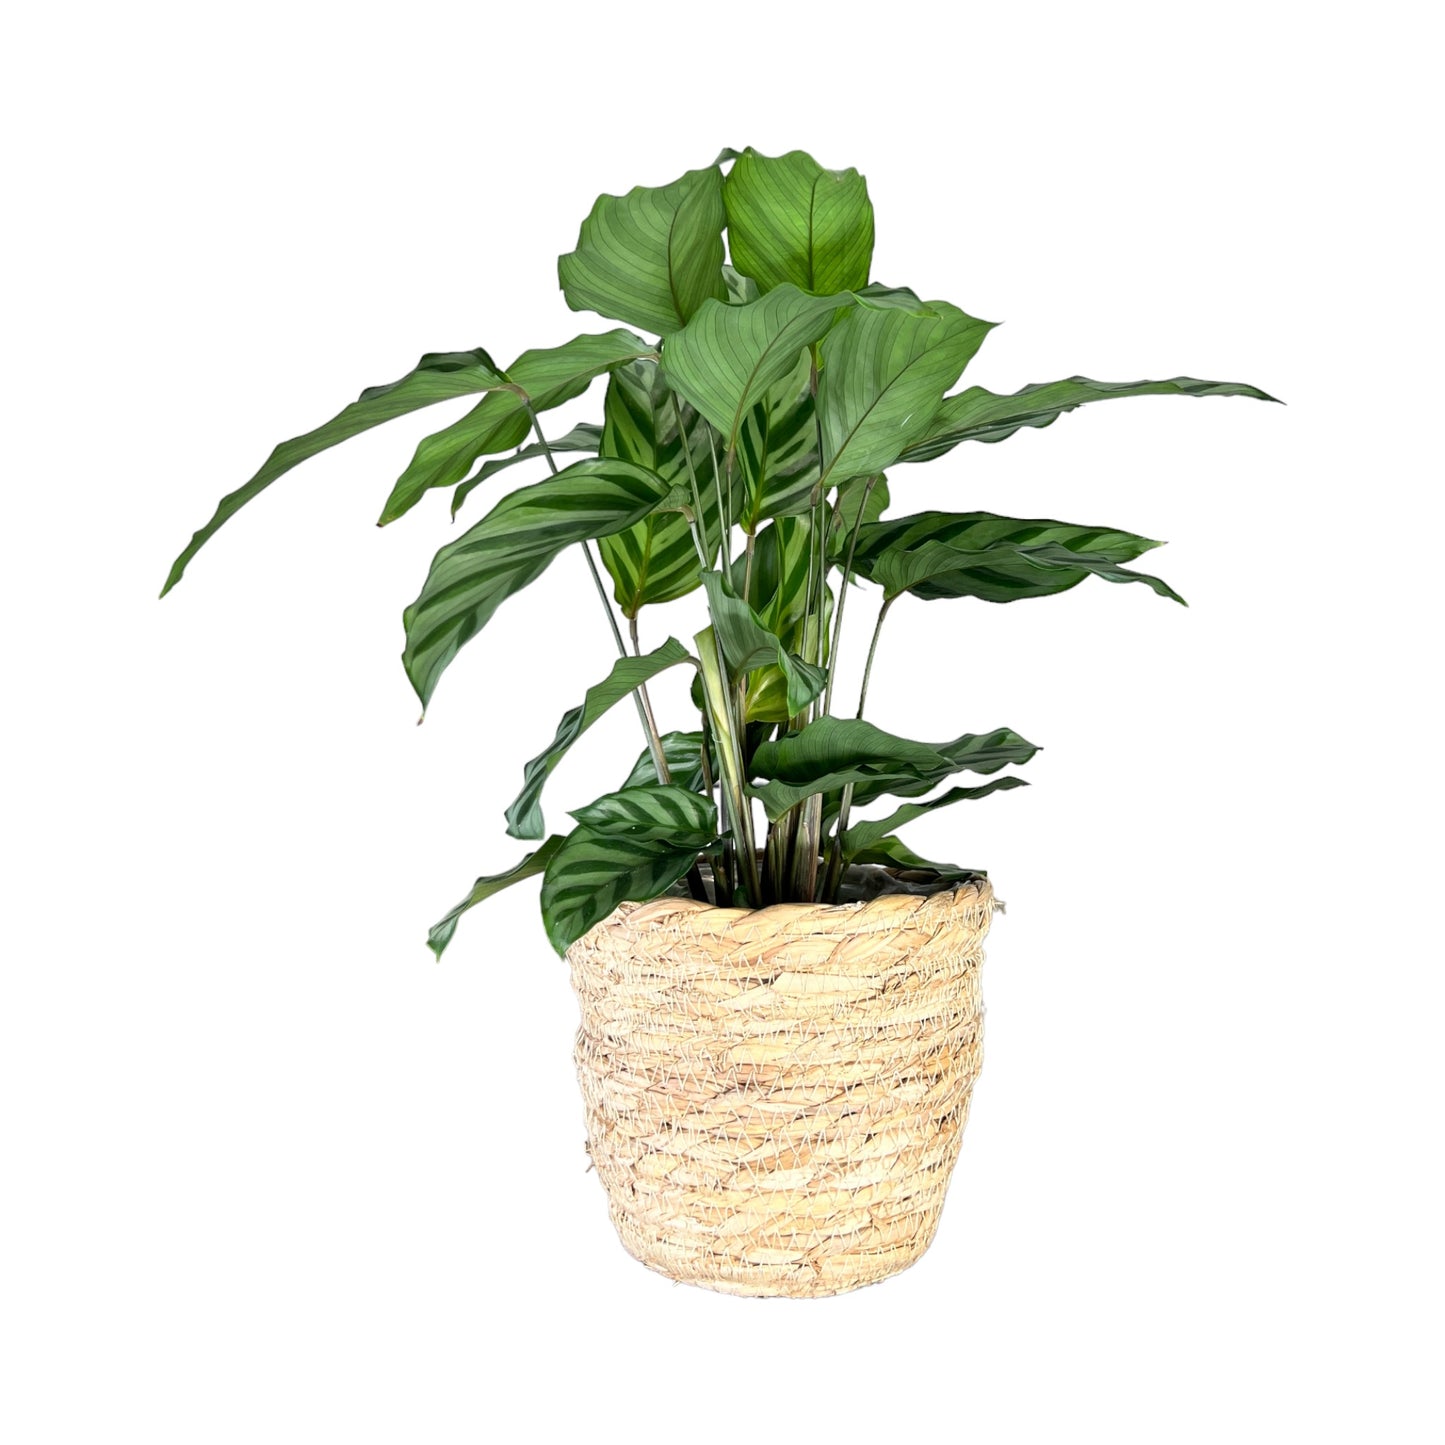 Calathea 12cm Mix in Basket - Green Plant The Horti House